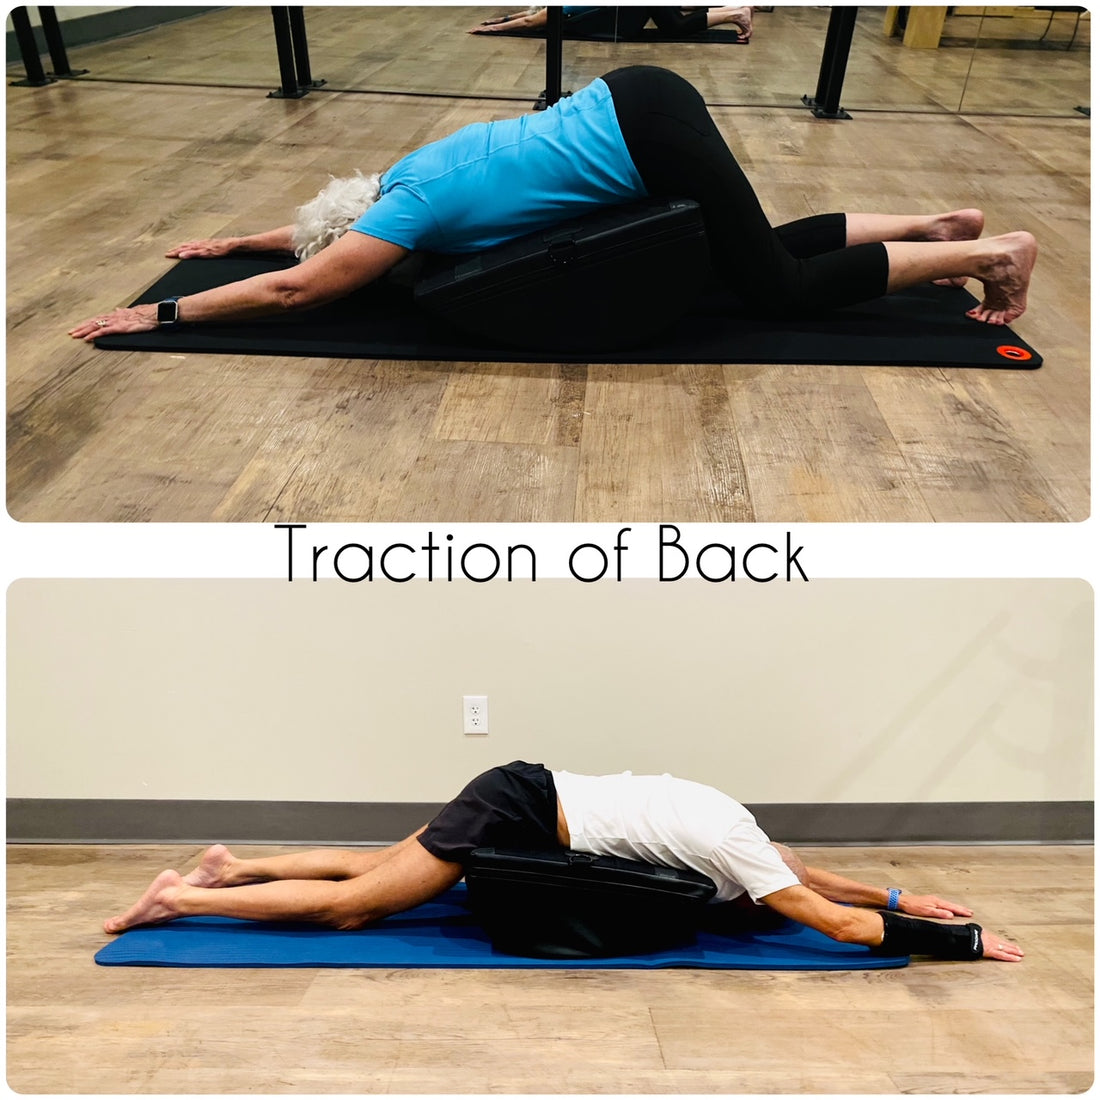 self traction of the low back with positional stretches over the MINIMAX